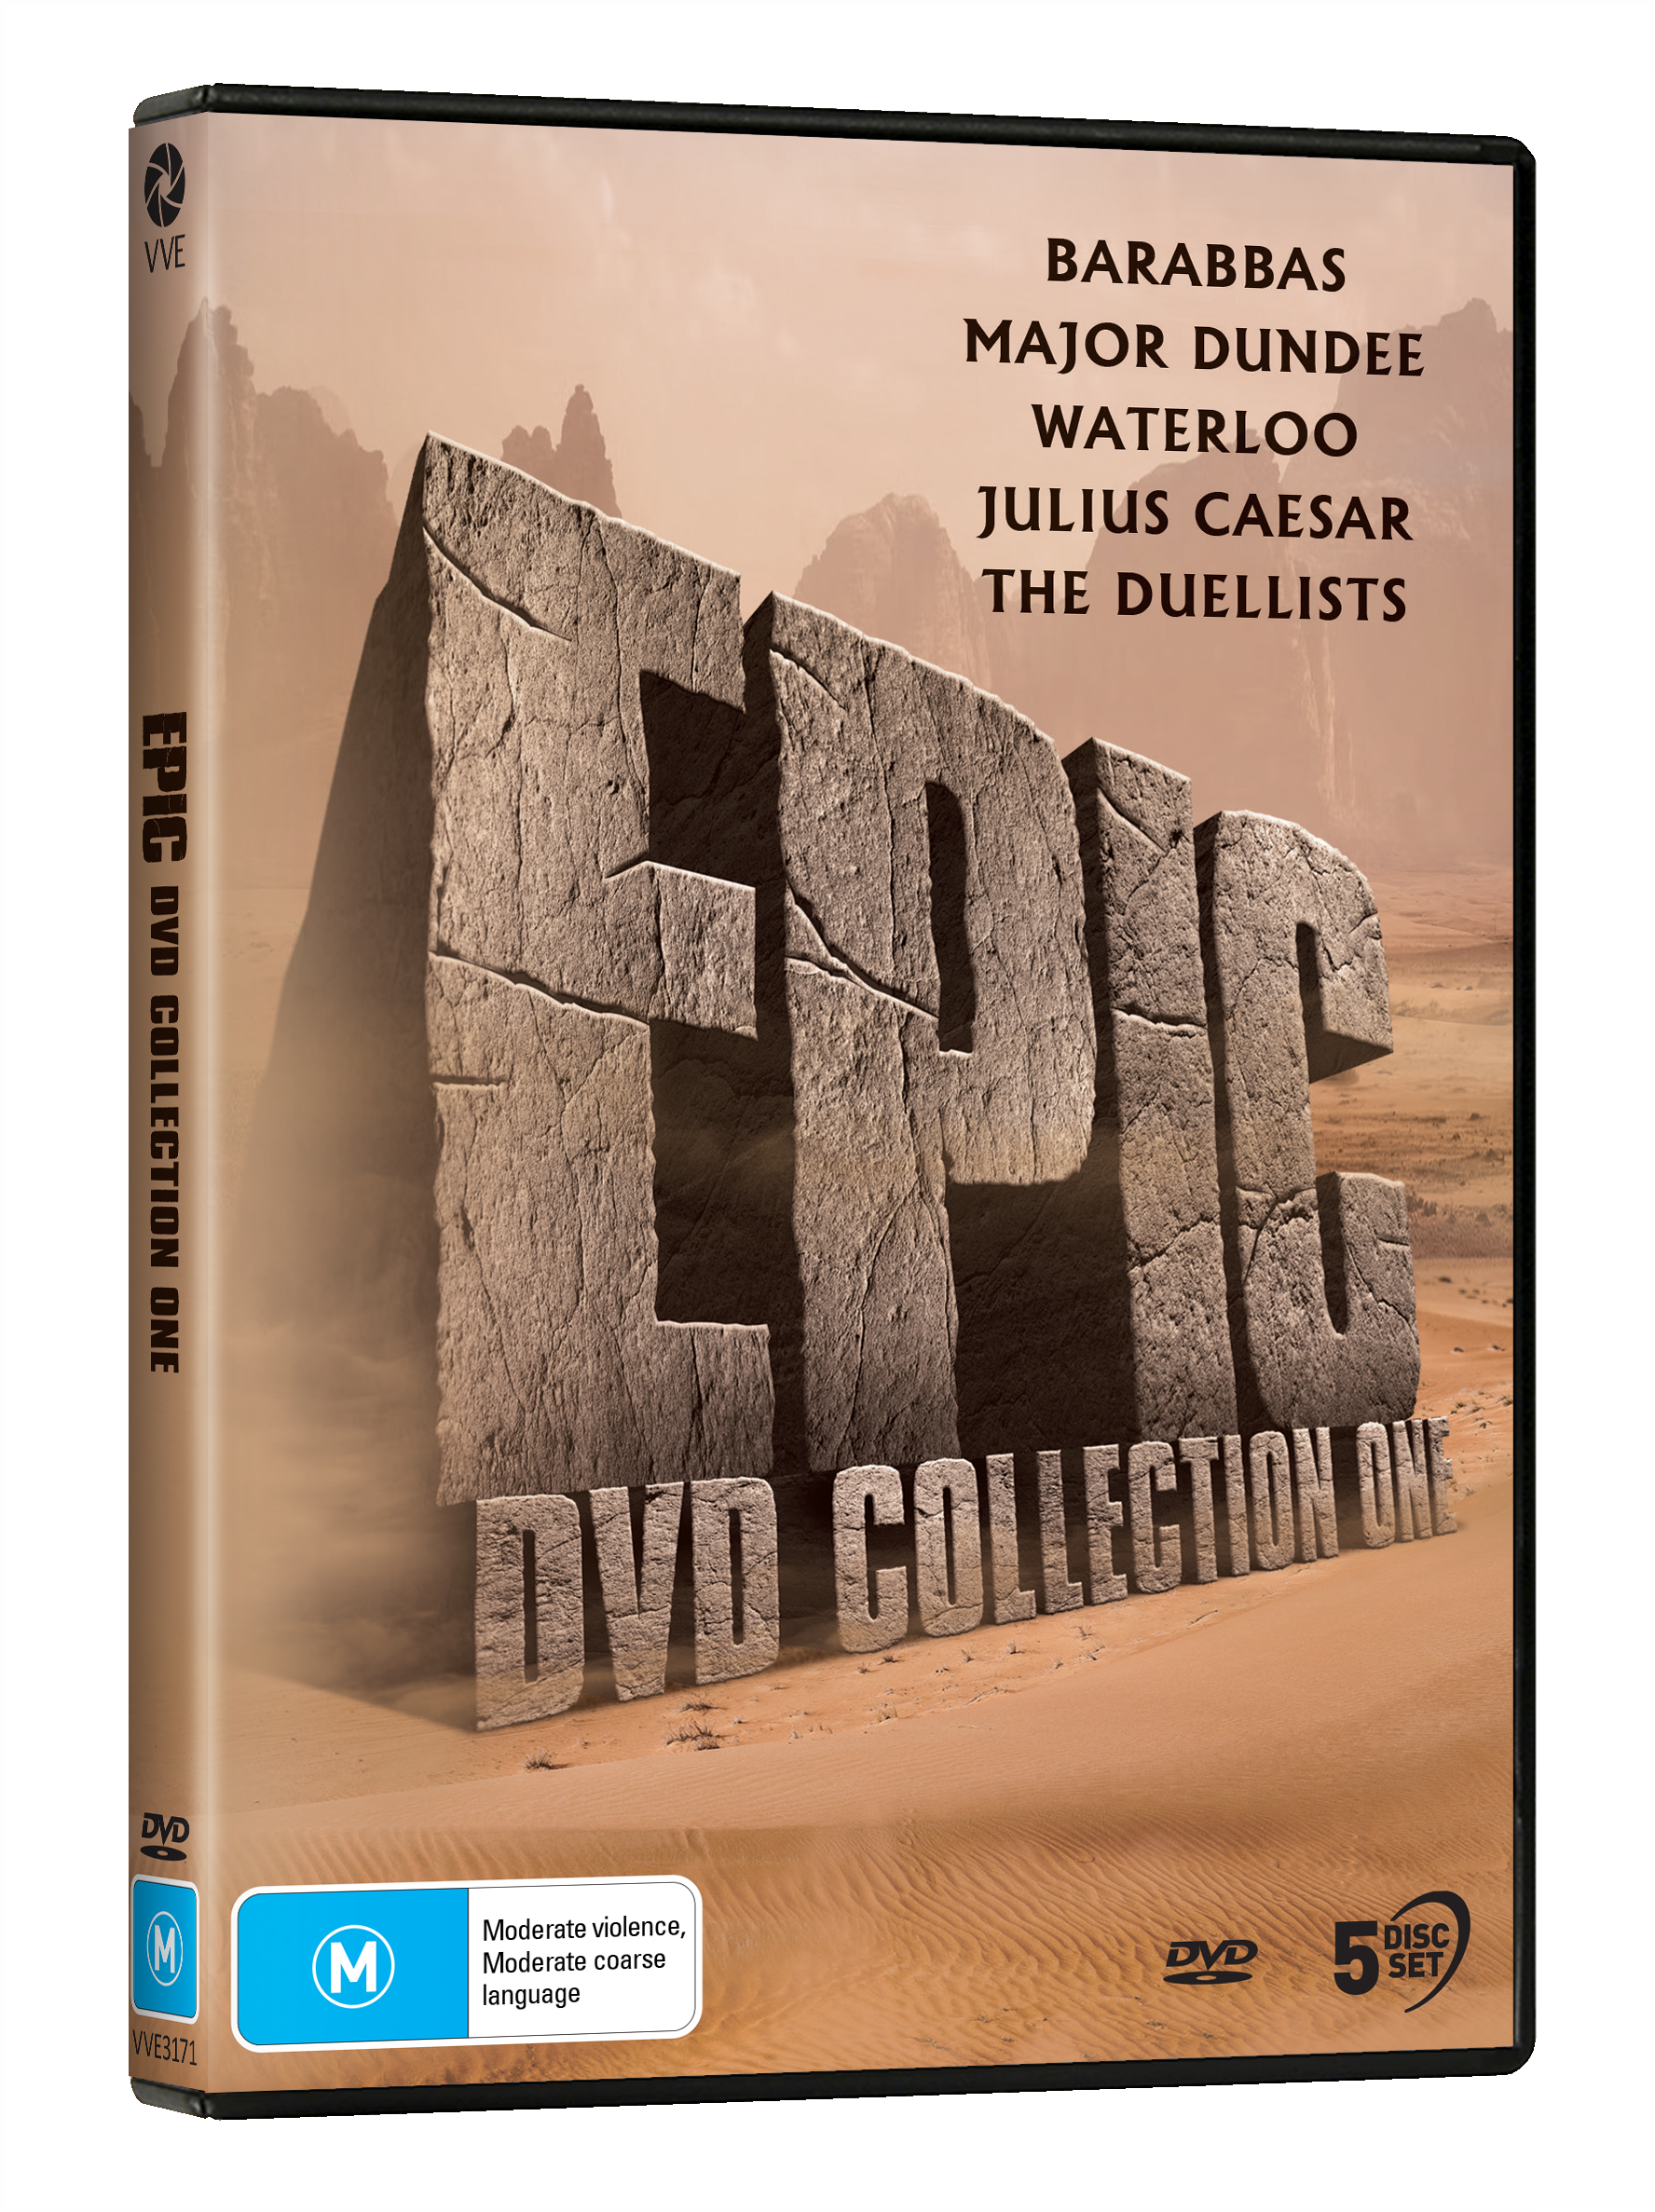 One　Epic　Via　DVD　Collection　Vision　Entertainment